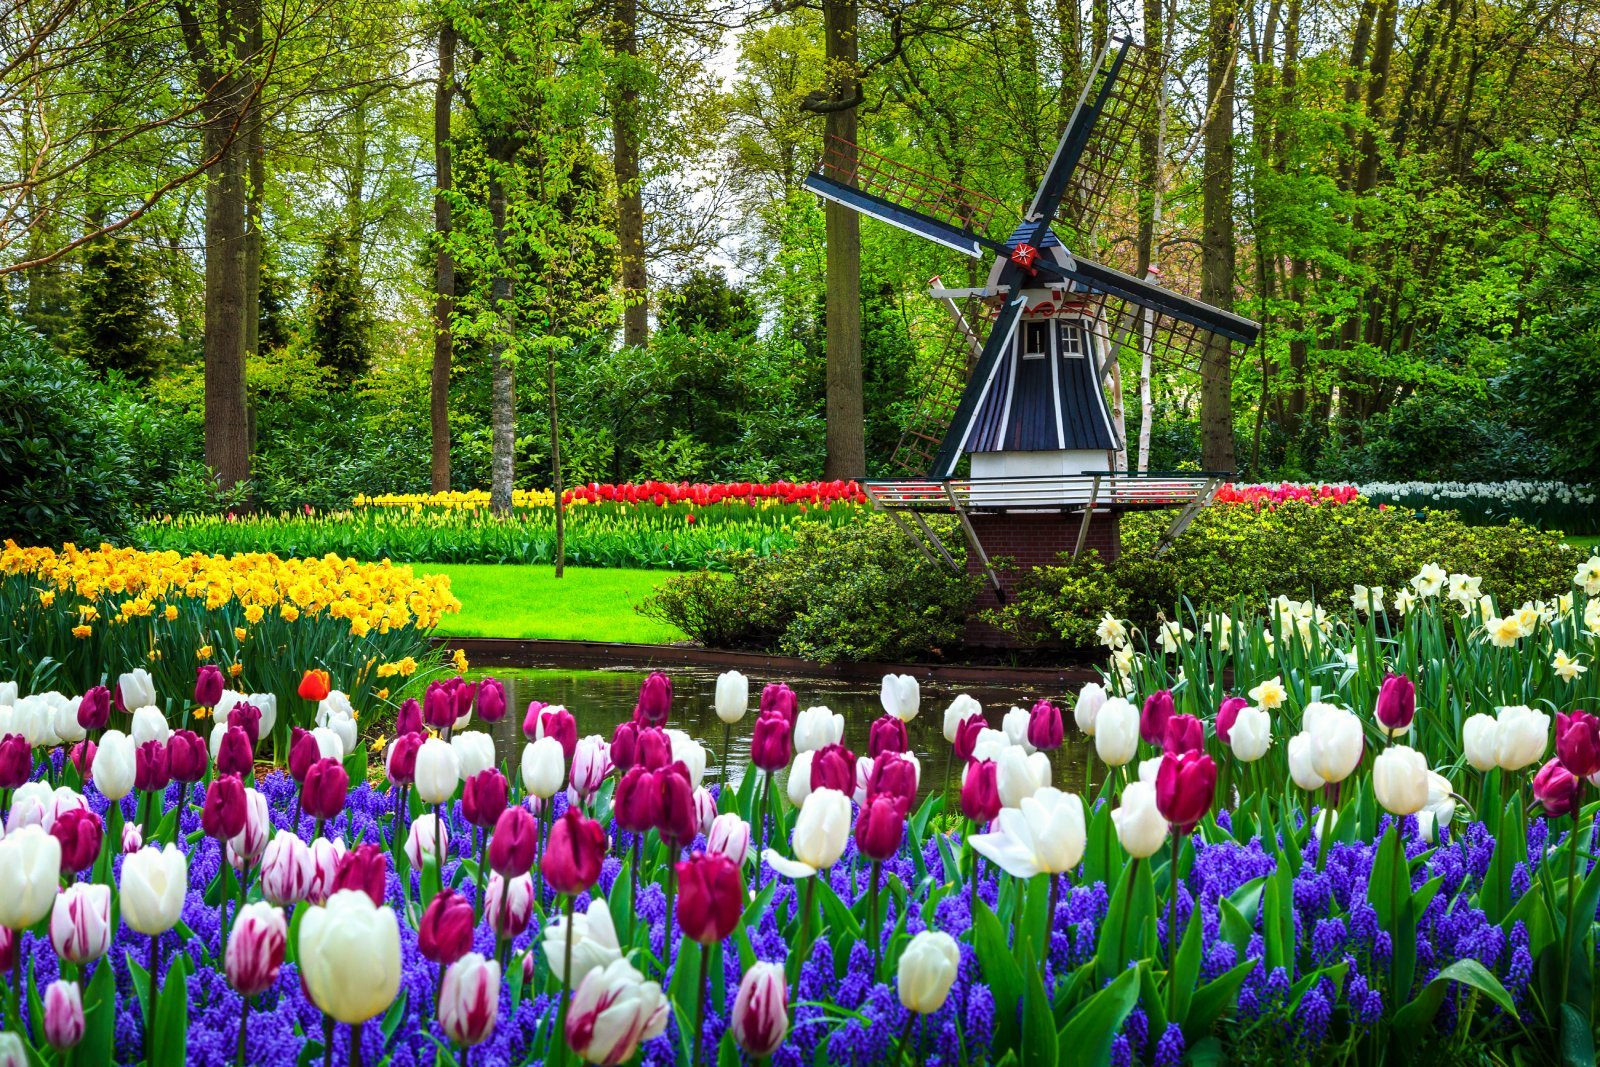 <p class="wp-caption-text">Image Credit: Shutterstock / Gaspar Janos</p>  <p><span>The Keukenhof Gardens in the Netherlands is one of the largest flower gardens in the world, renowned for its stunning display of over 7 million tulips, daffodils, and other spring flowers. Spread over 32 hectares, the garden is a kaleidoscope of color from March to May, showcasing meticulously designed flower beds, themed gardens, and inspirational exhibitions. Keukenhof is a celebration of tulips and a tribute to Dutch floral heritage and horticultural expertise, drawing visitors from all corners of the globe.</span></p> <p><b>Insider’s Tip: </b><span>Weekdays, particularly in the morning, tend to be less crowded, offering a more tranquil experience.</span></p> <p><b>When to Travel: </b><span>Mid-March to mid-May, with peak bloom typically occurring in mid-April.</span></p> <p><b>How to Get There: </b><span>Keukenhof is located in Lisse, accessible by bus from Amsterdam, Haarlem, and Leiden. The nearest international airport is Amsterdam Schiphol.</span></p>